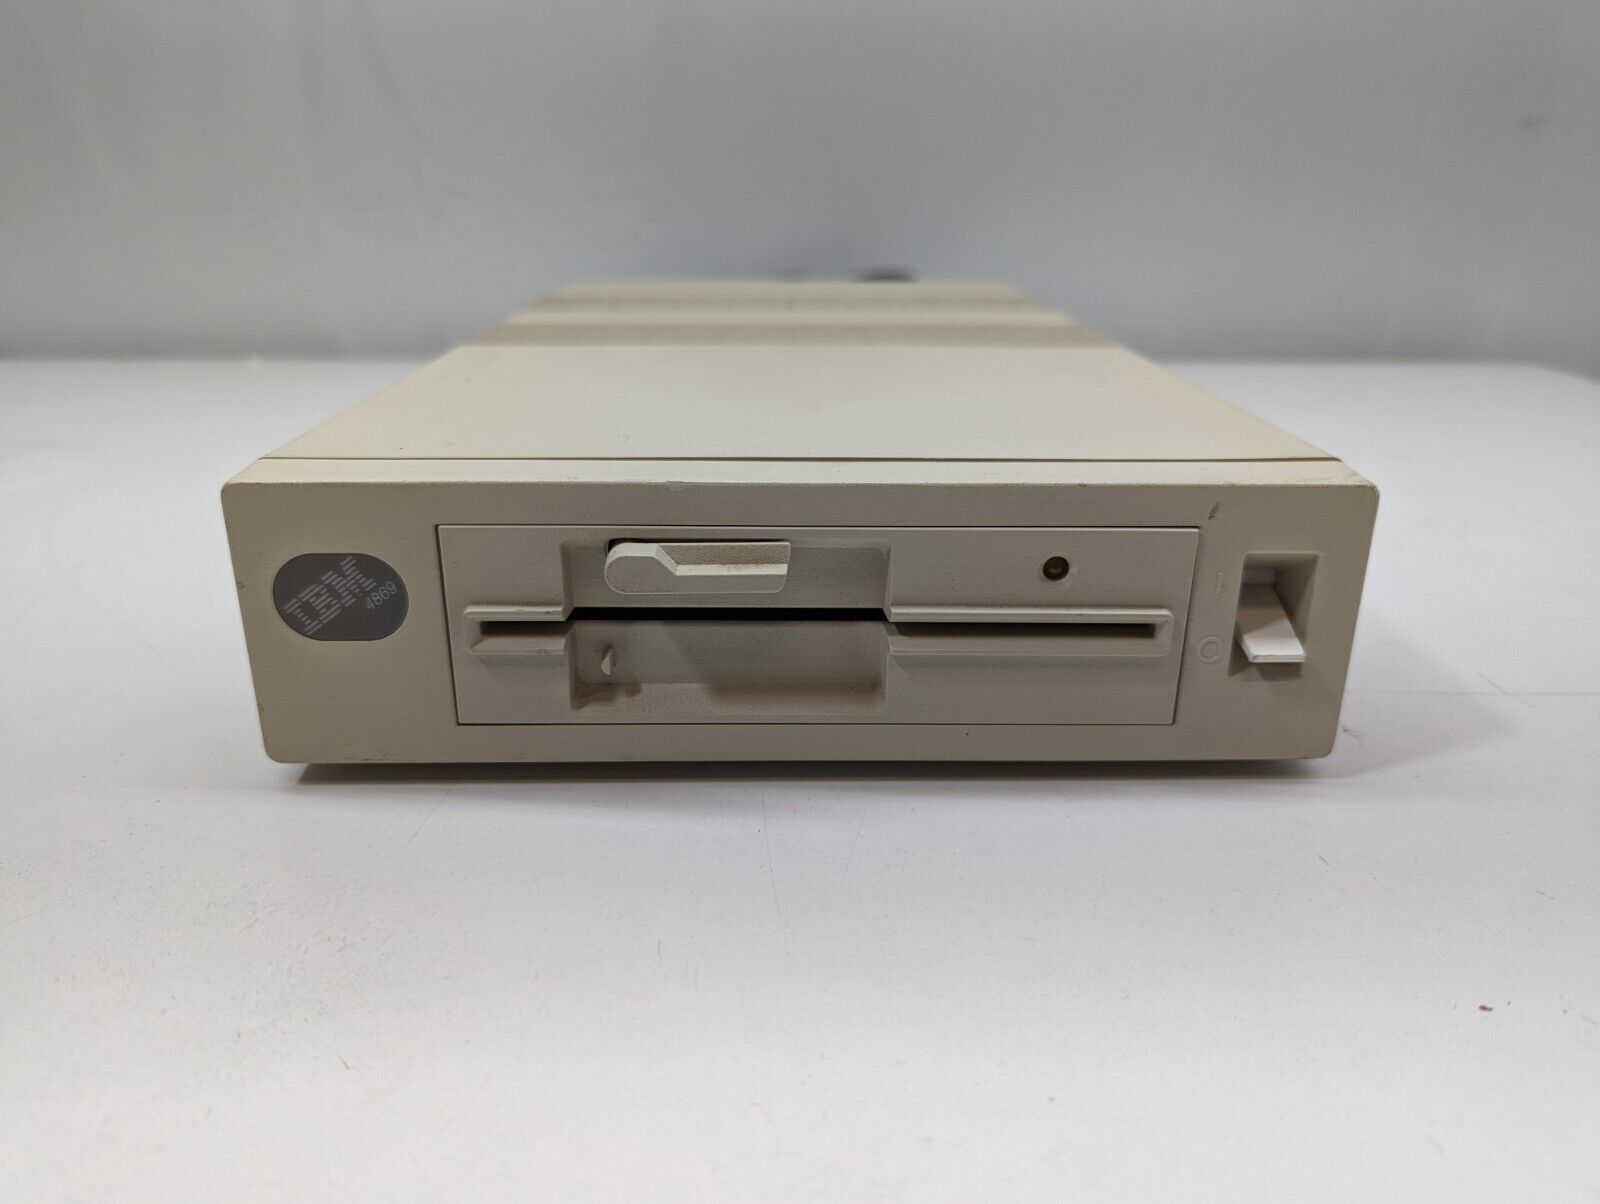 IBM Type 4869 External 5 1/4in Floppy Disk Drive Mainframe Collection - UNTESTED